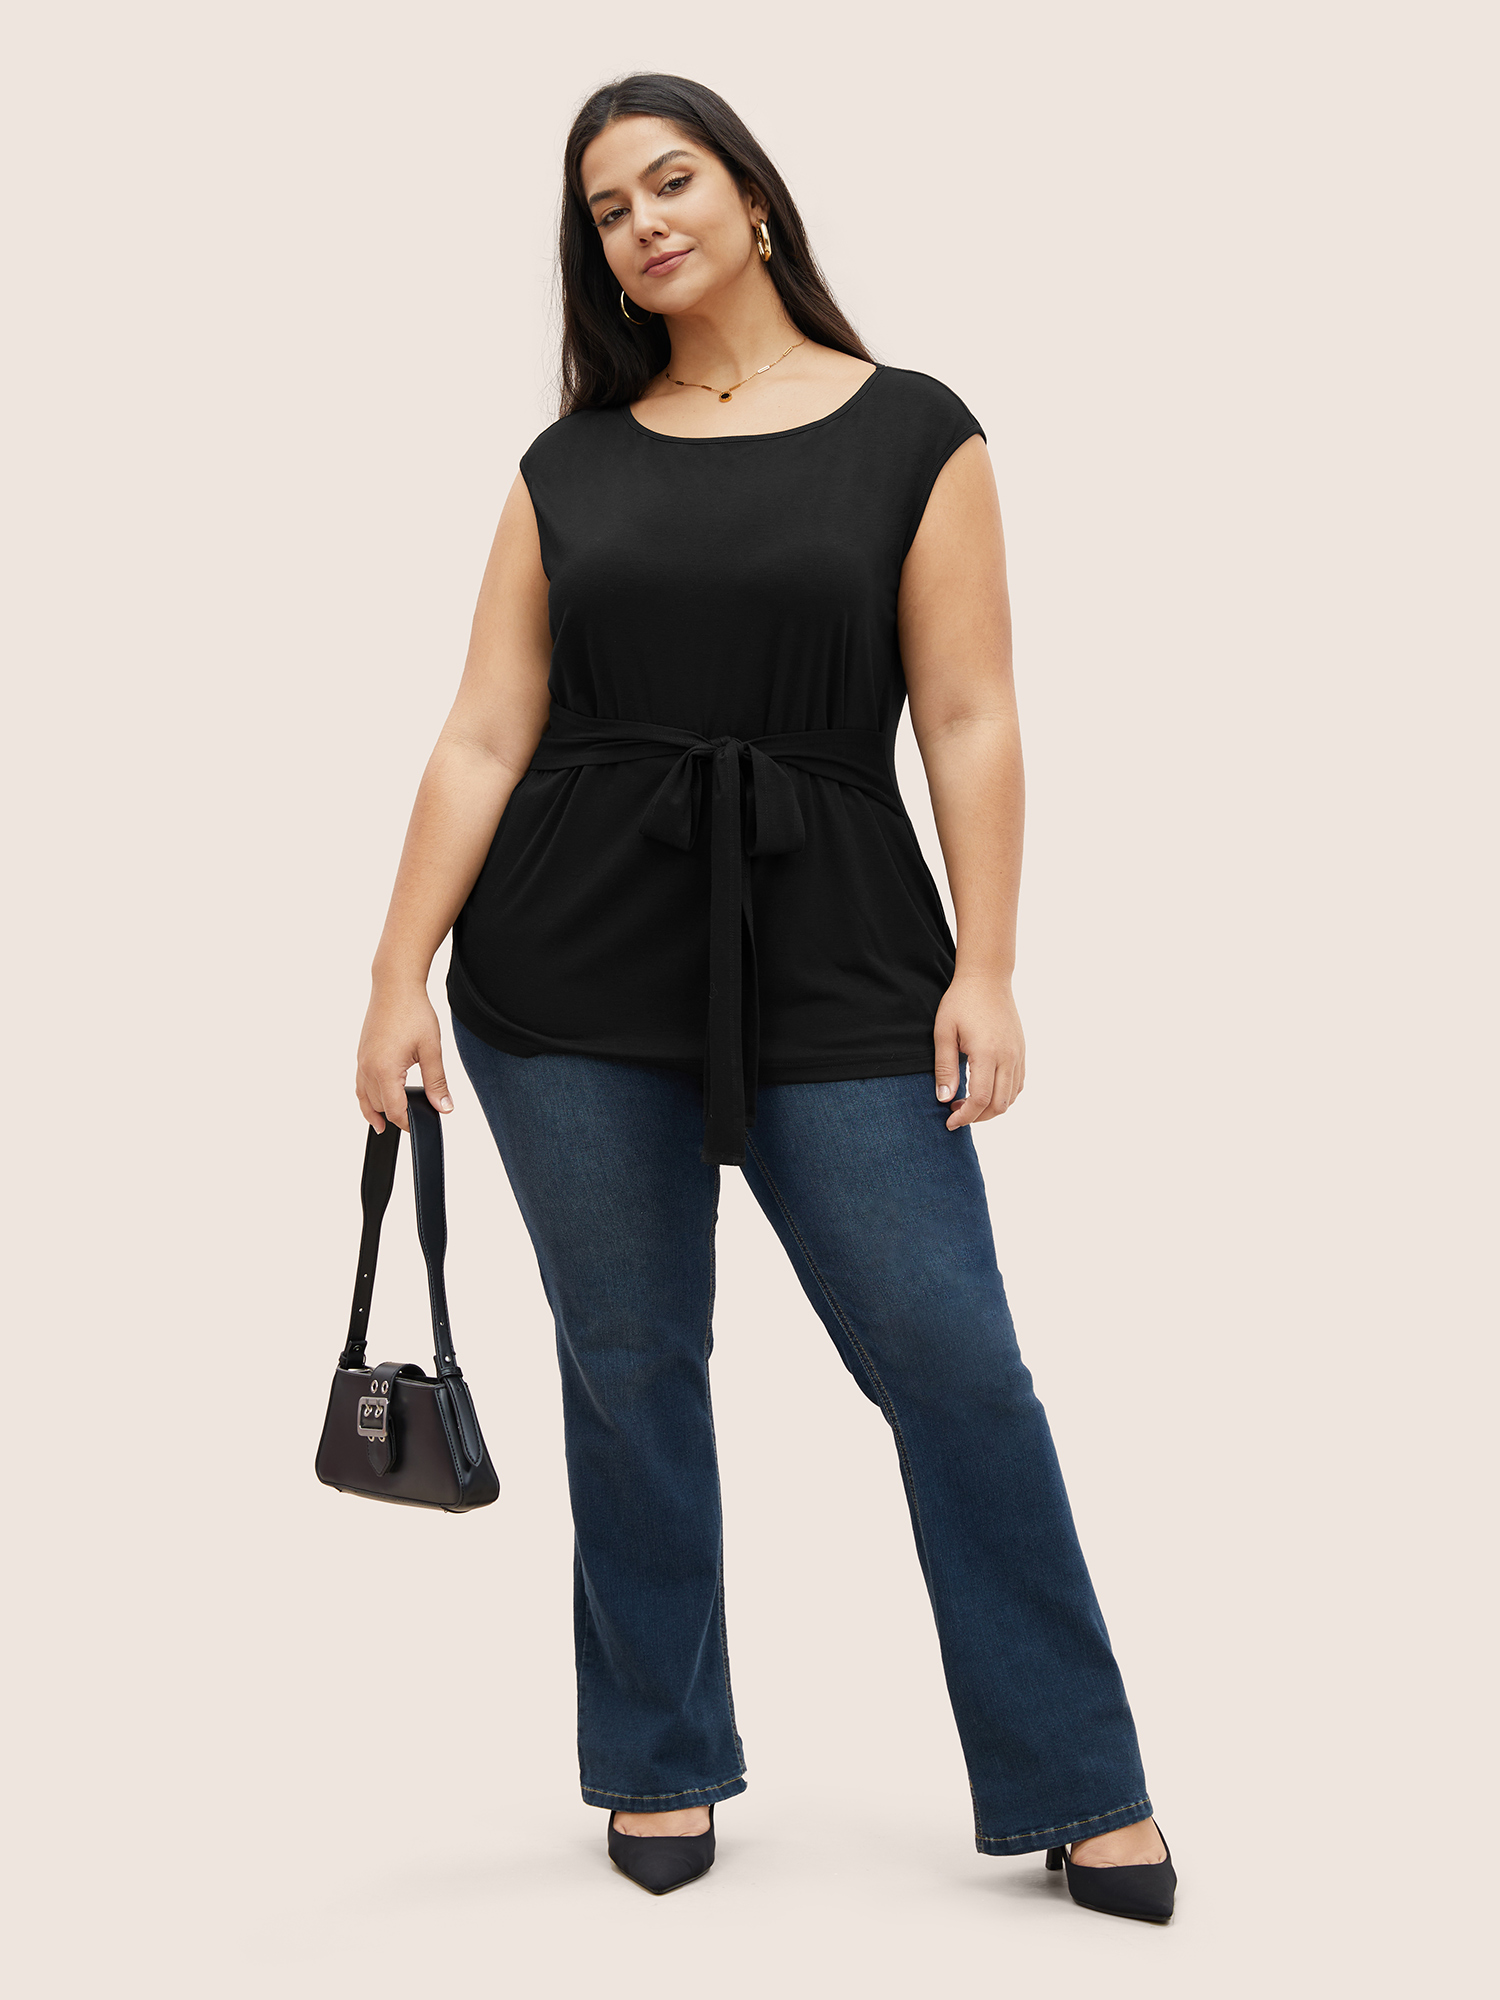 

Plus Size Supersoft Essentials Plain Cap Sleeve Tie Knot Knit Top Black Women At the Office Tie knot Boat Neck Work T-shirts BloomChic